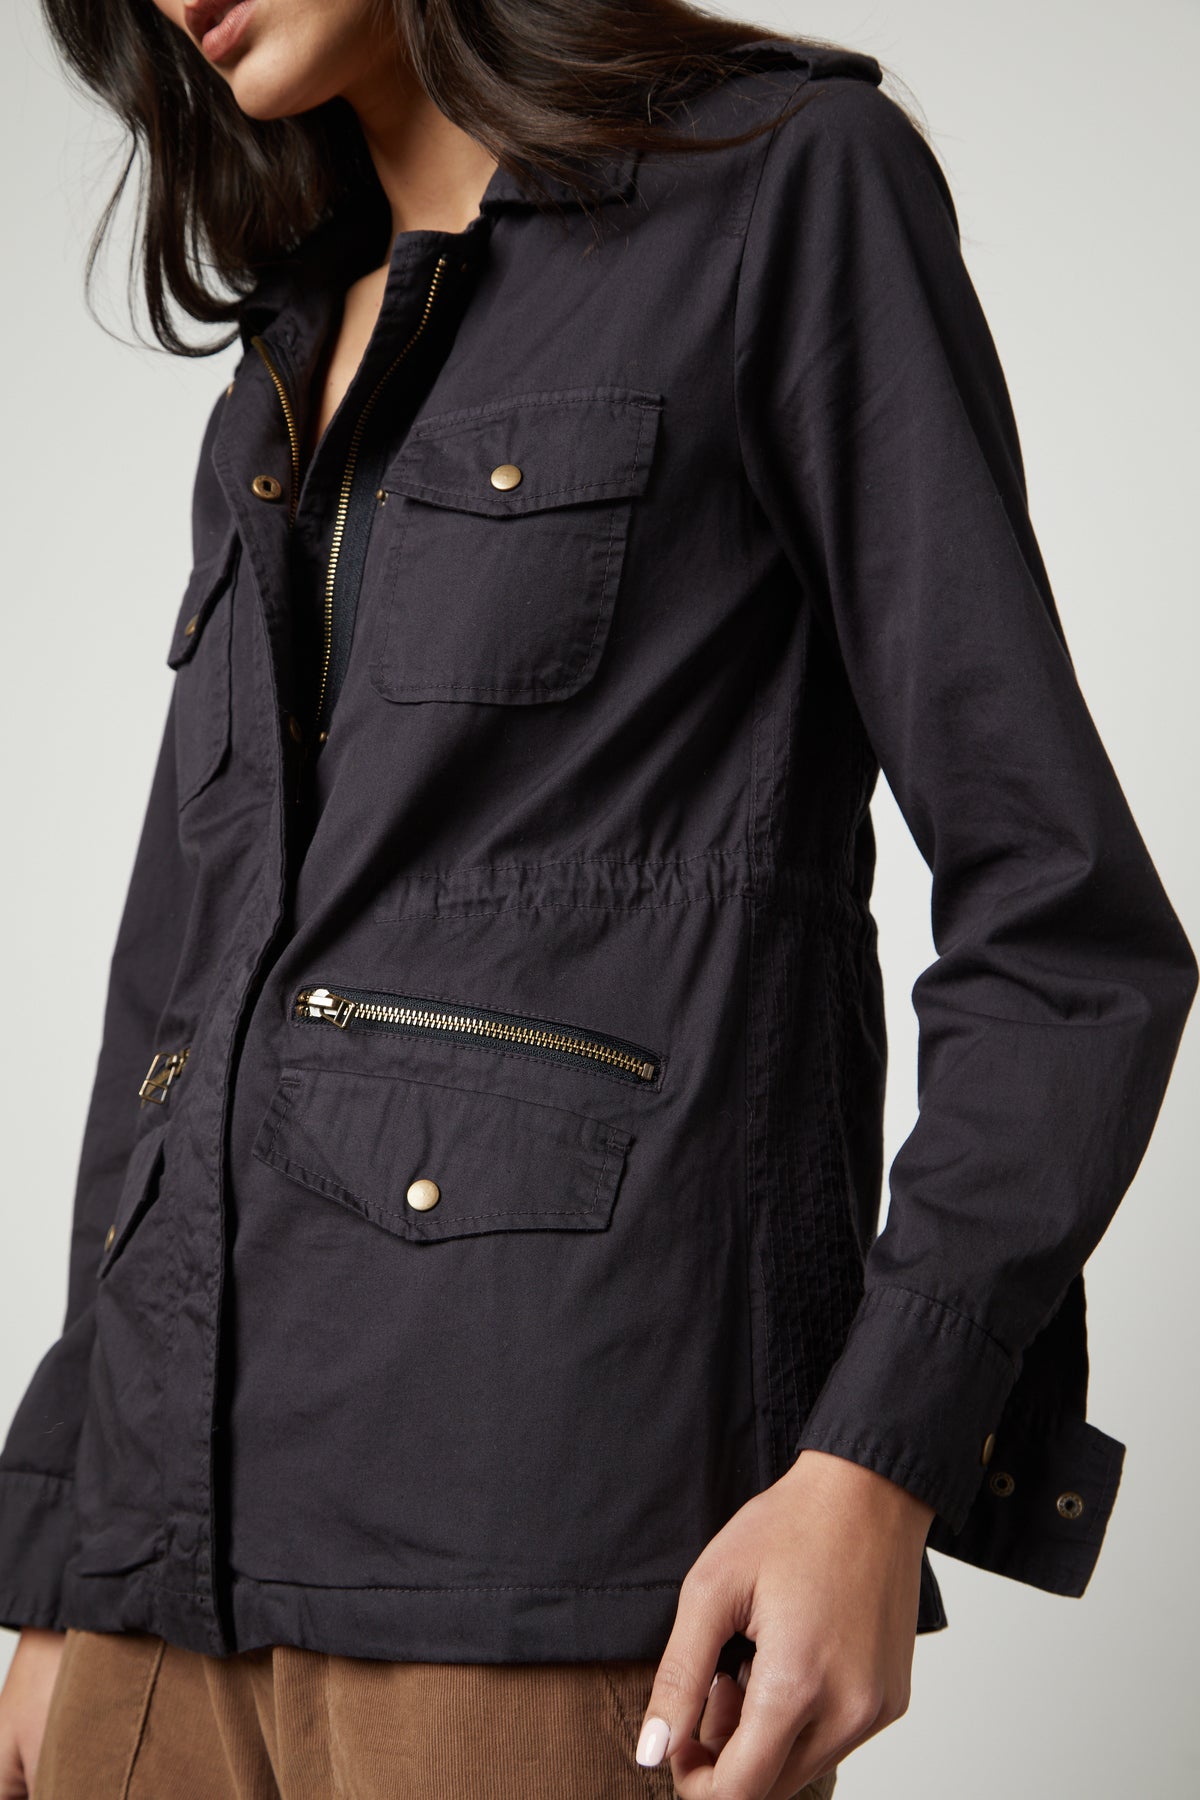 A woman wearing a RUBY LIGHT-WEIGHT ARMY JACKET by Velvet by Graham & Spencer with zippers and pockets adds versatility to her closet.-35783096598721